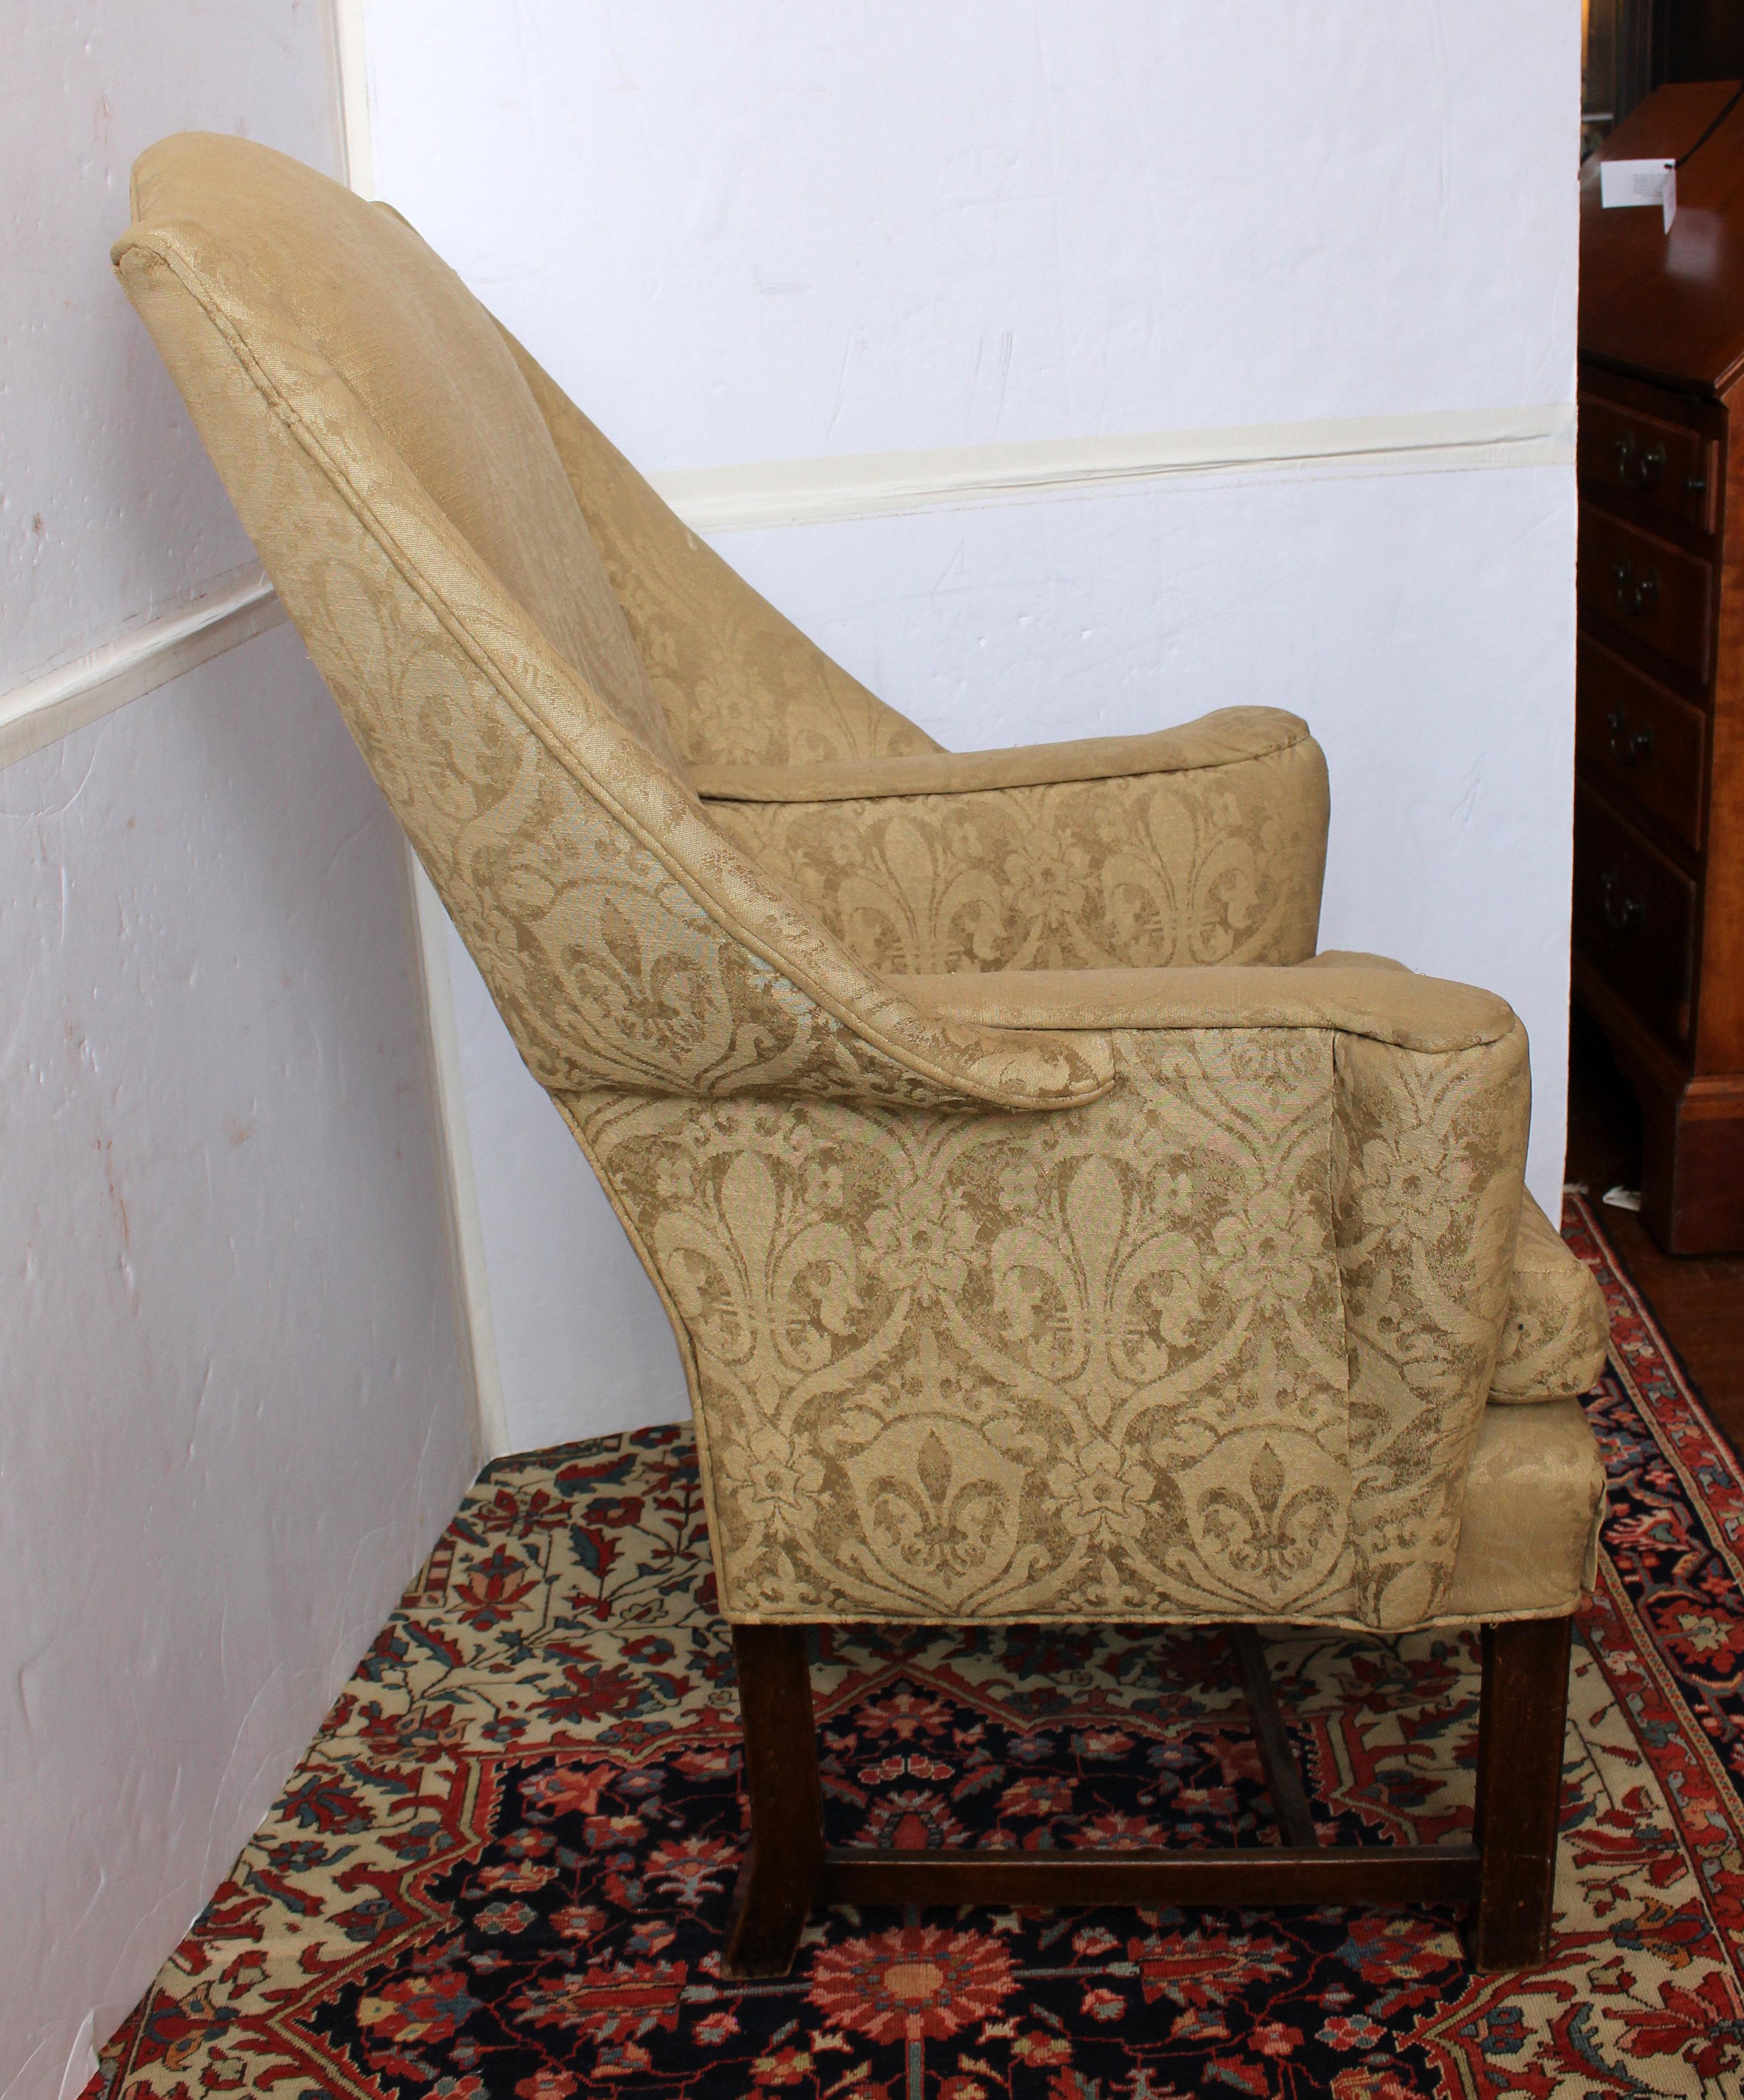 Circa 1780 Irish sleigh back wing chair. Raised on straight, square legs (the rear outswept). Shaped back descends gracefully to the wings and to the out-swept arms. In as found upholstery.
27